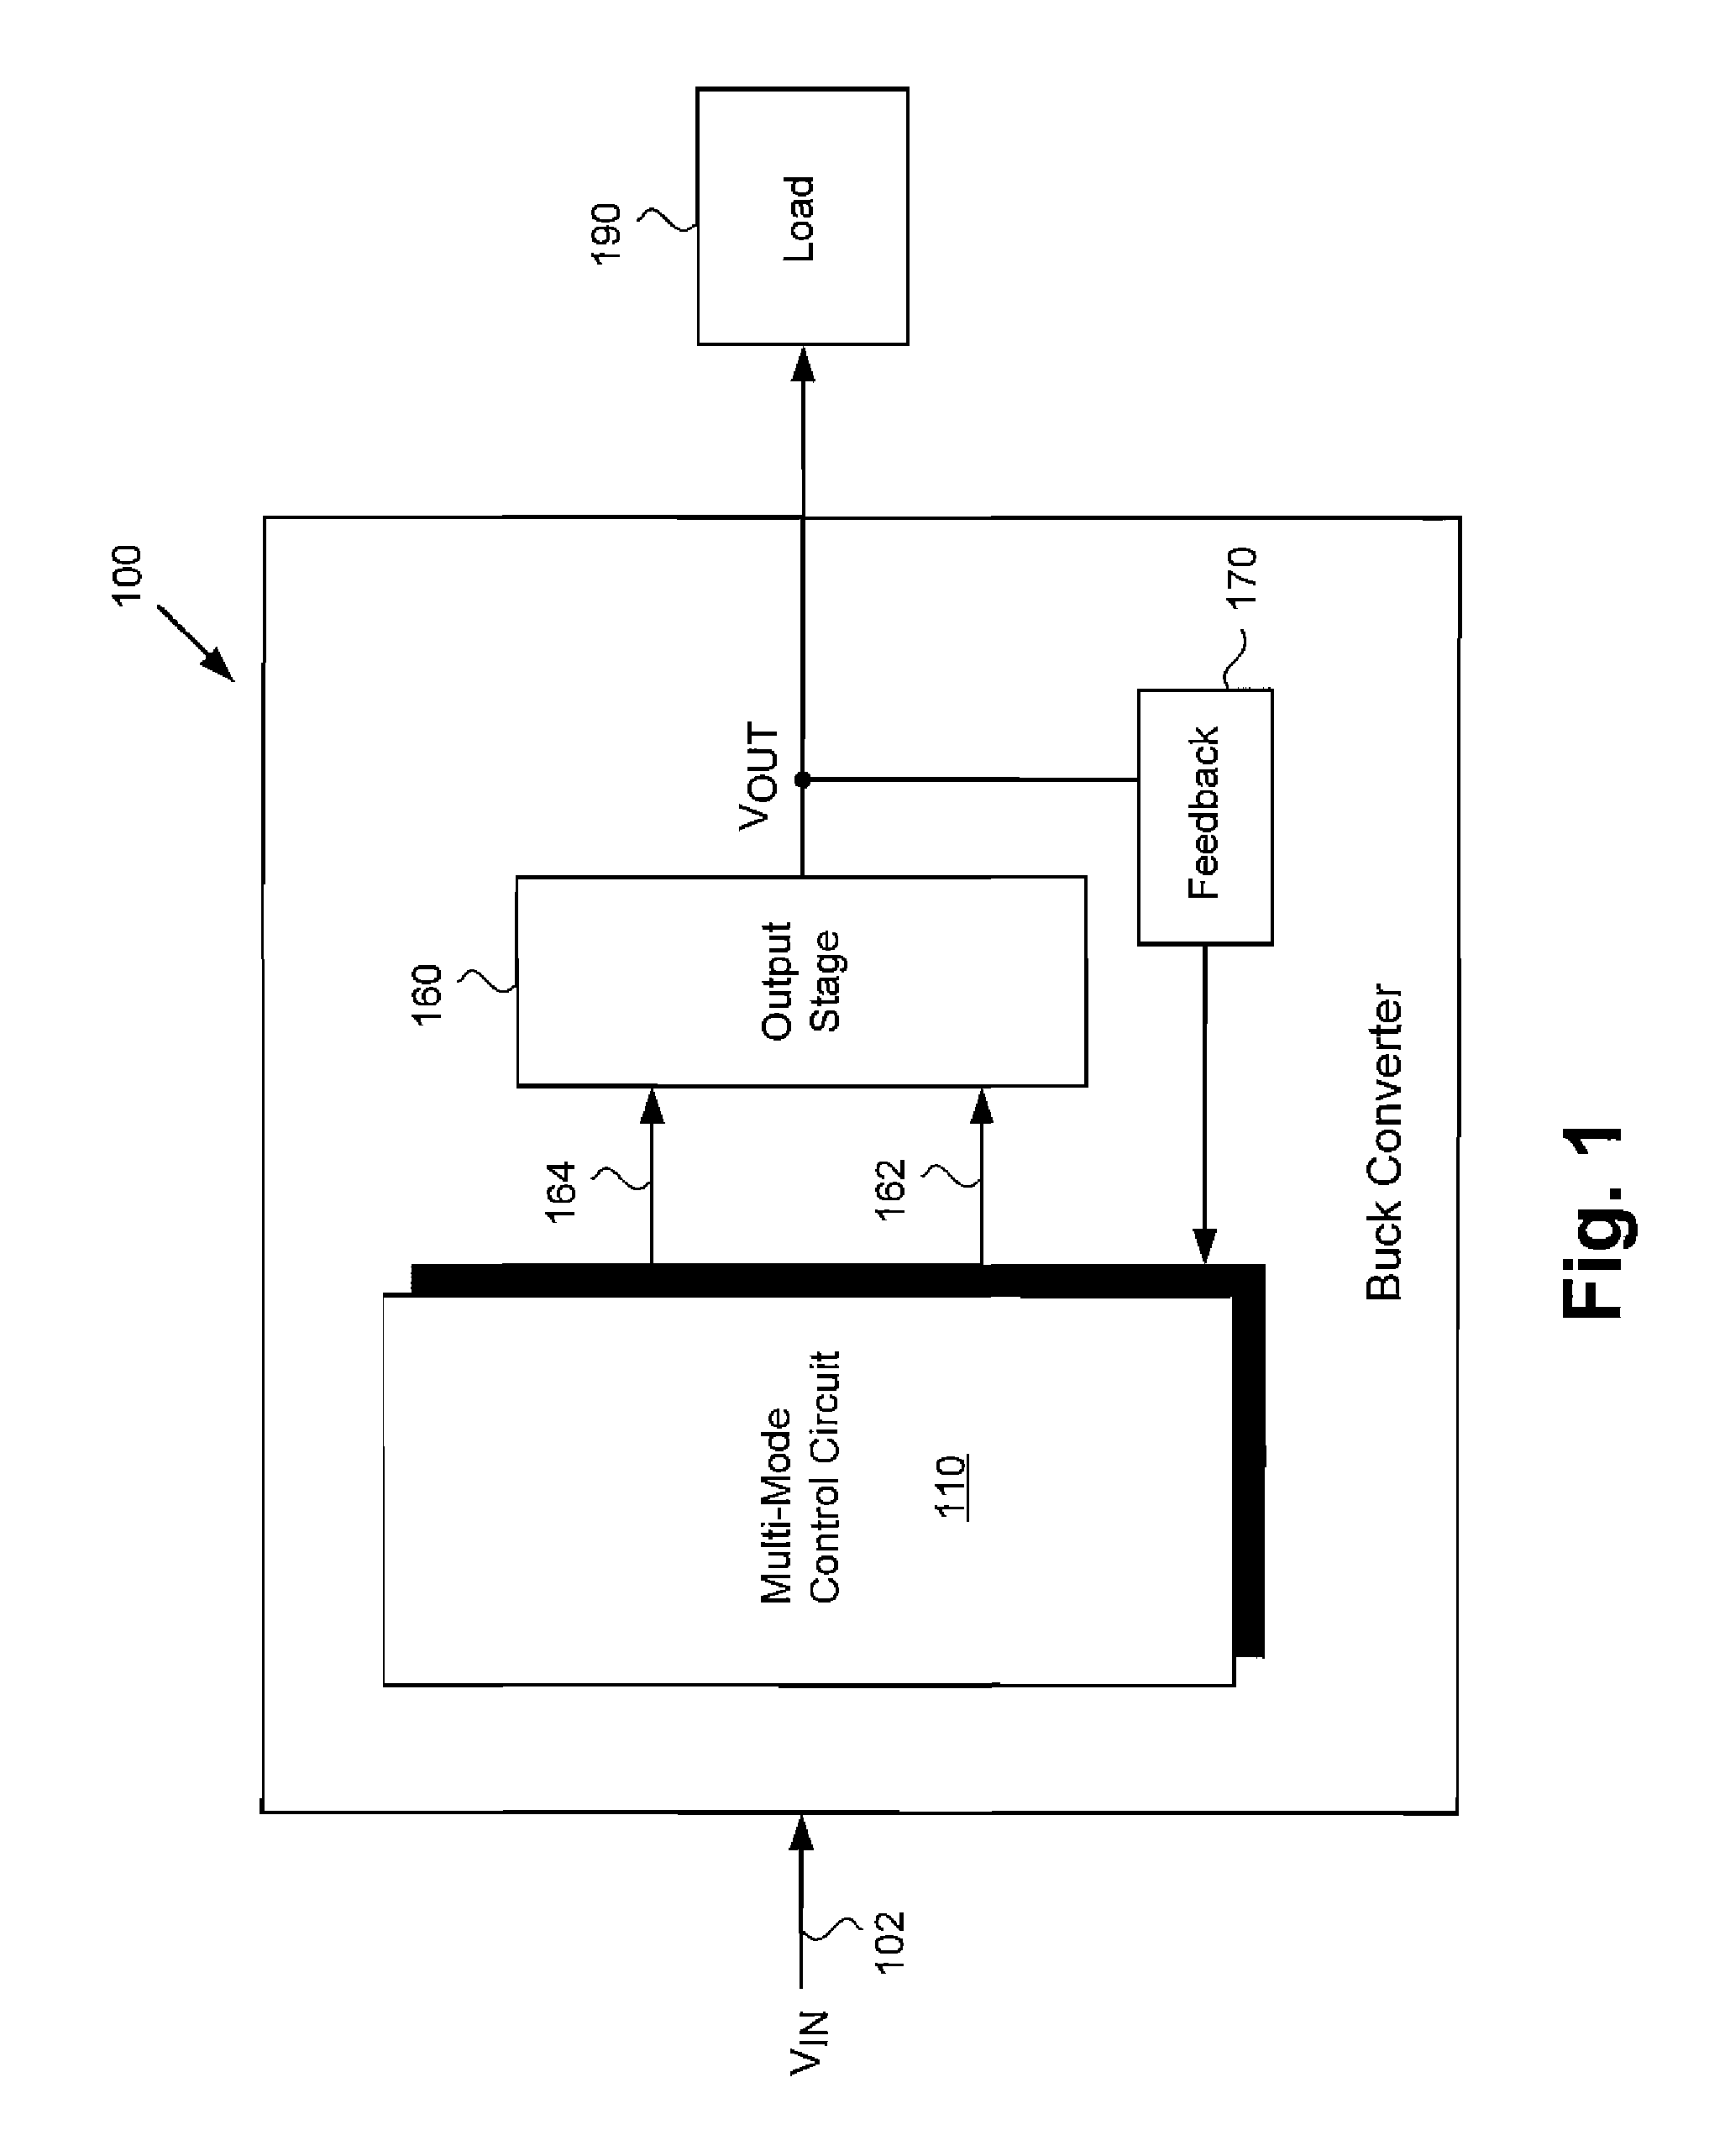 Synchronous Buck Converter Including Multi-Mode Control for Light Load Efficiency and Related Method